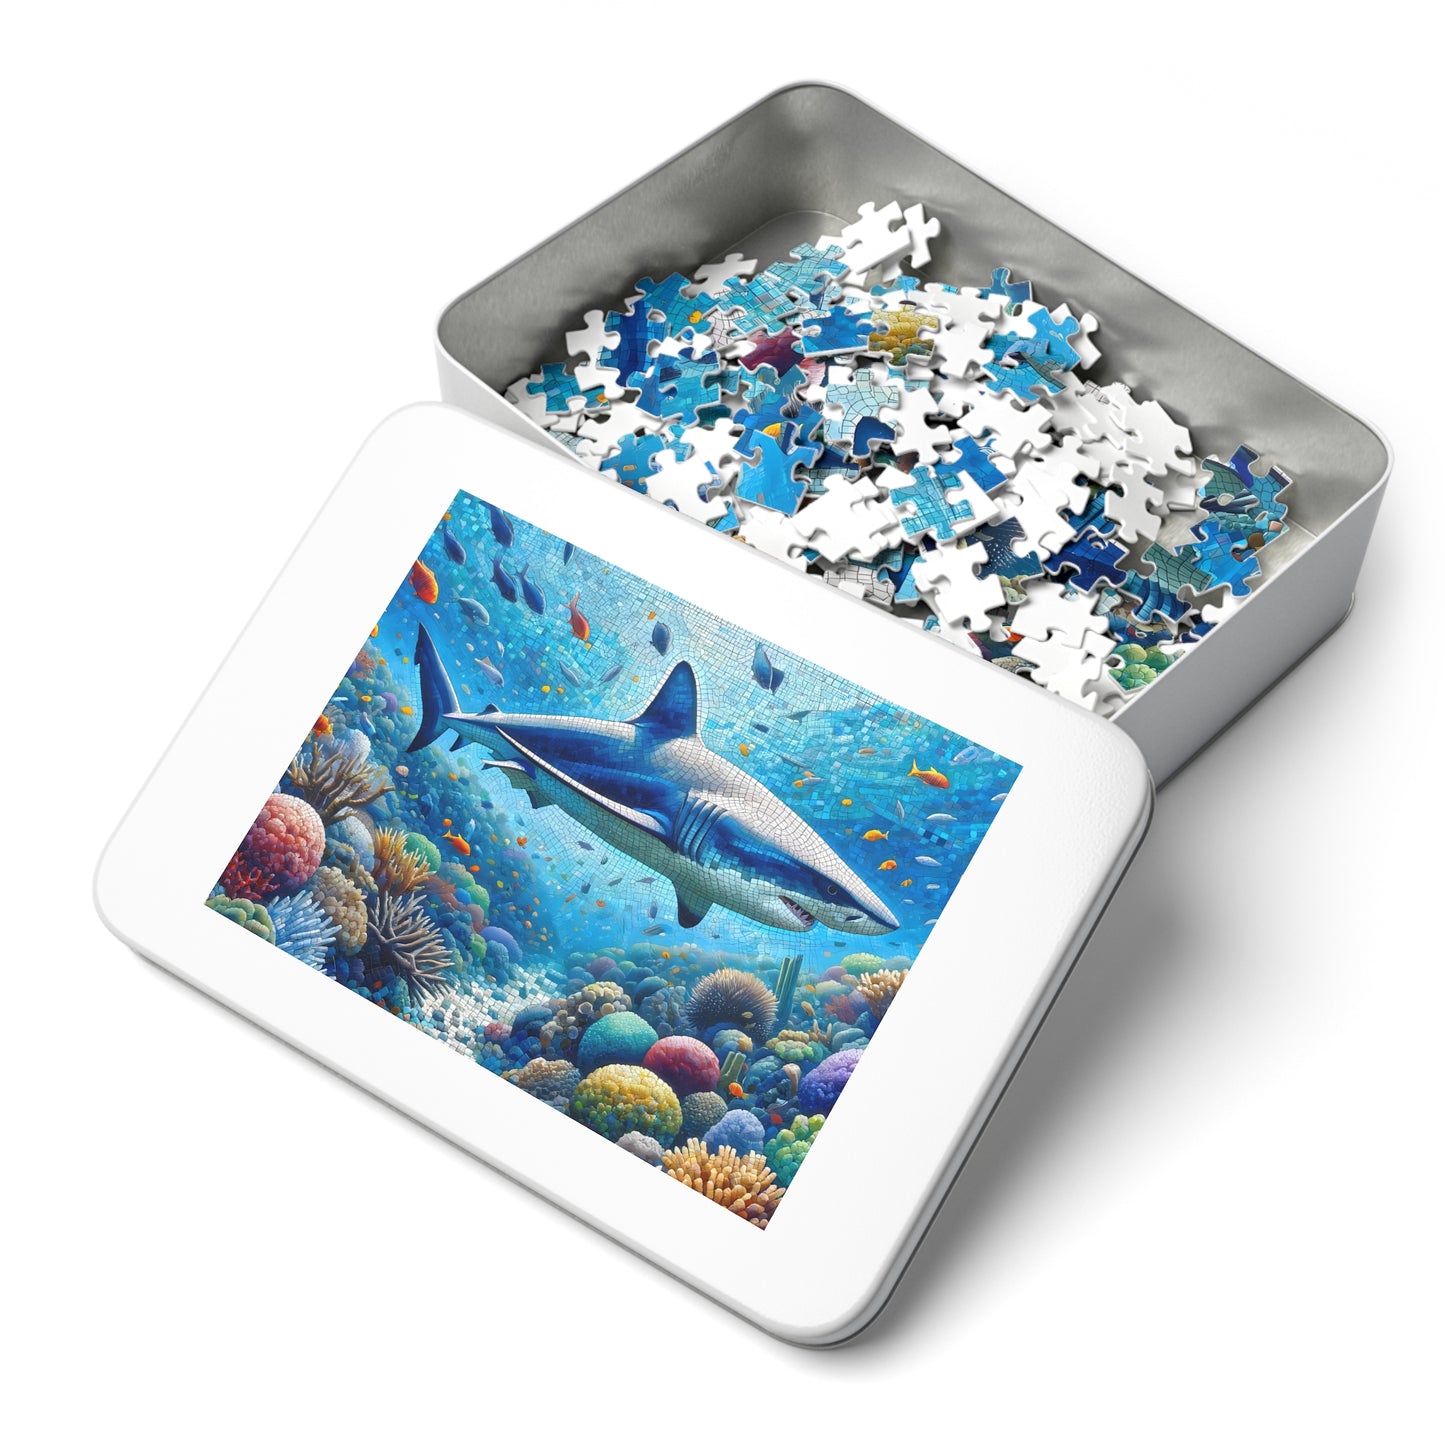 Shark in coral, Puzzle, Mosiac, Unique, Jigsaw, Family, Adults (110, 252, 500, 1000-Piece)